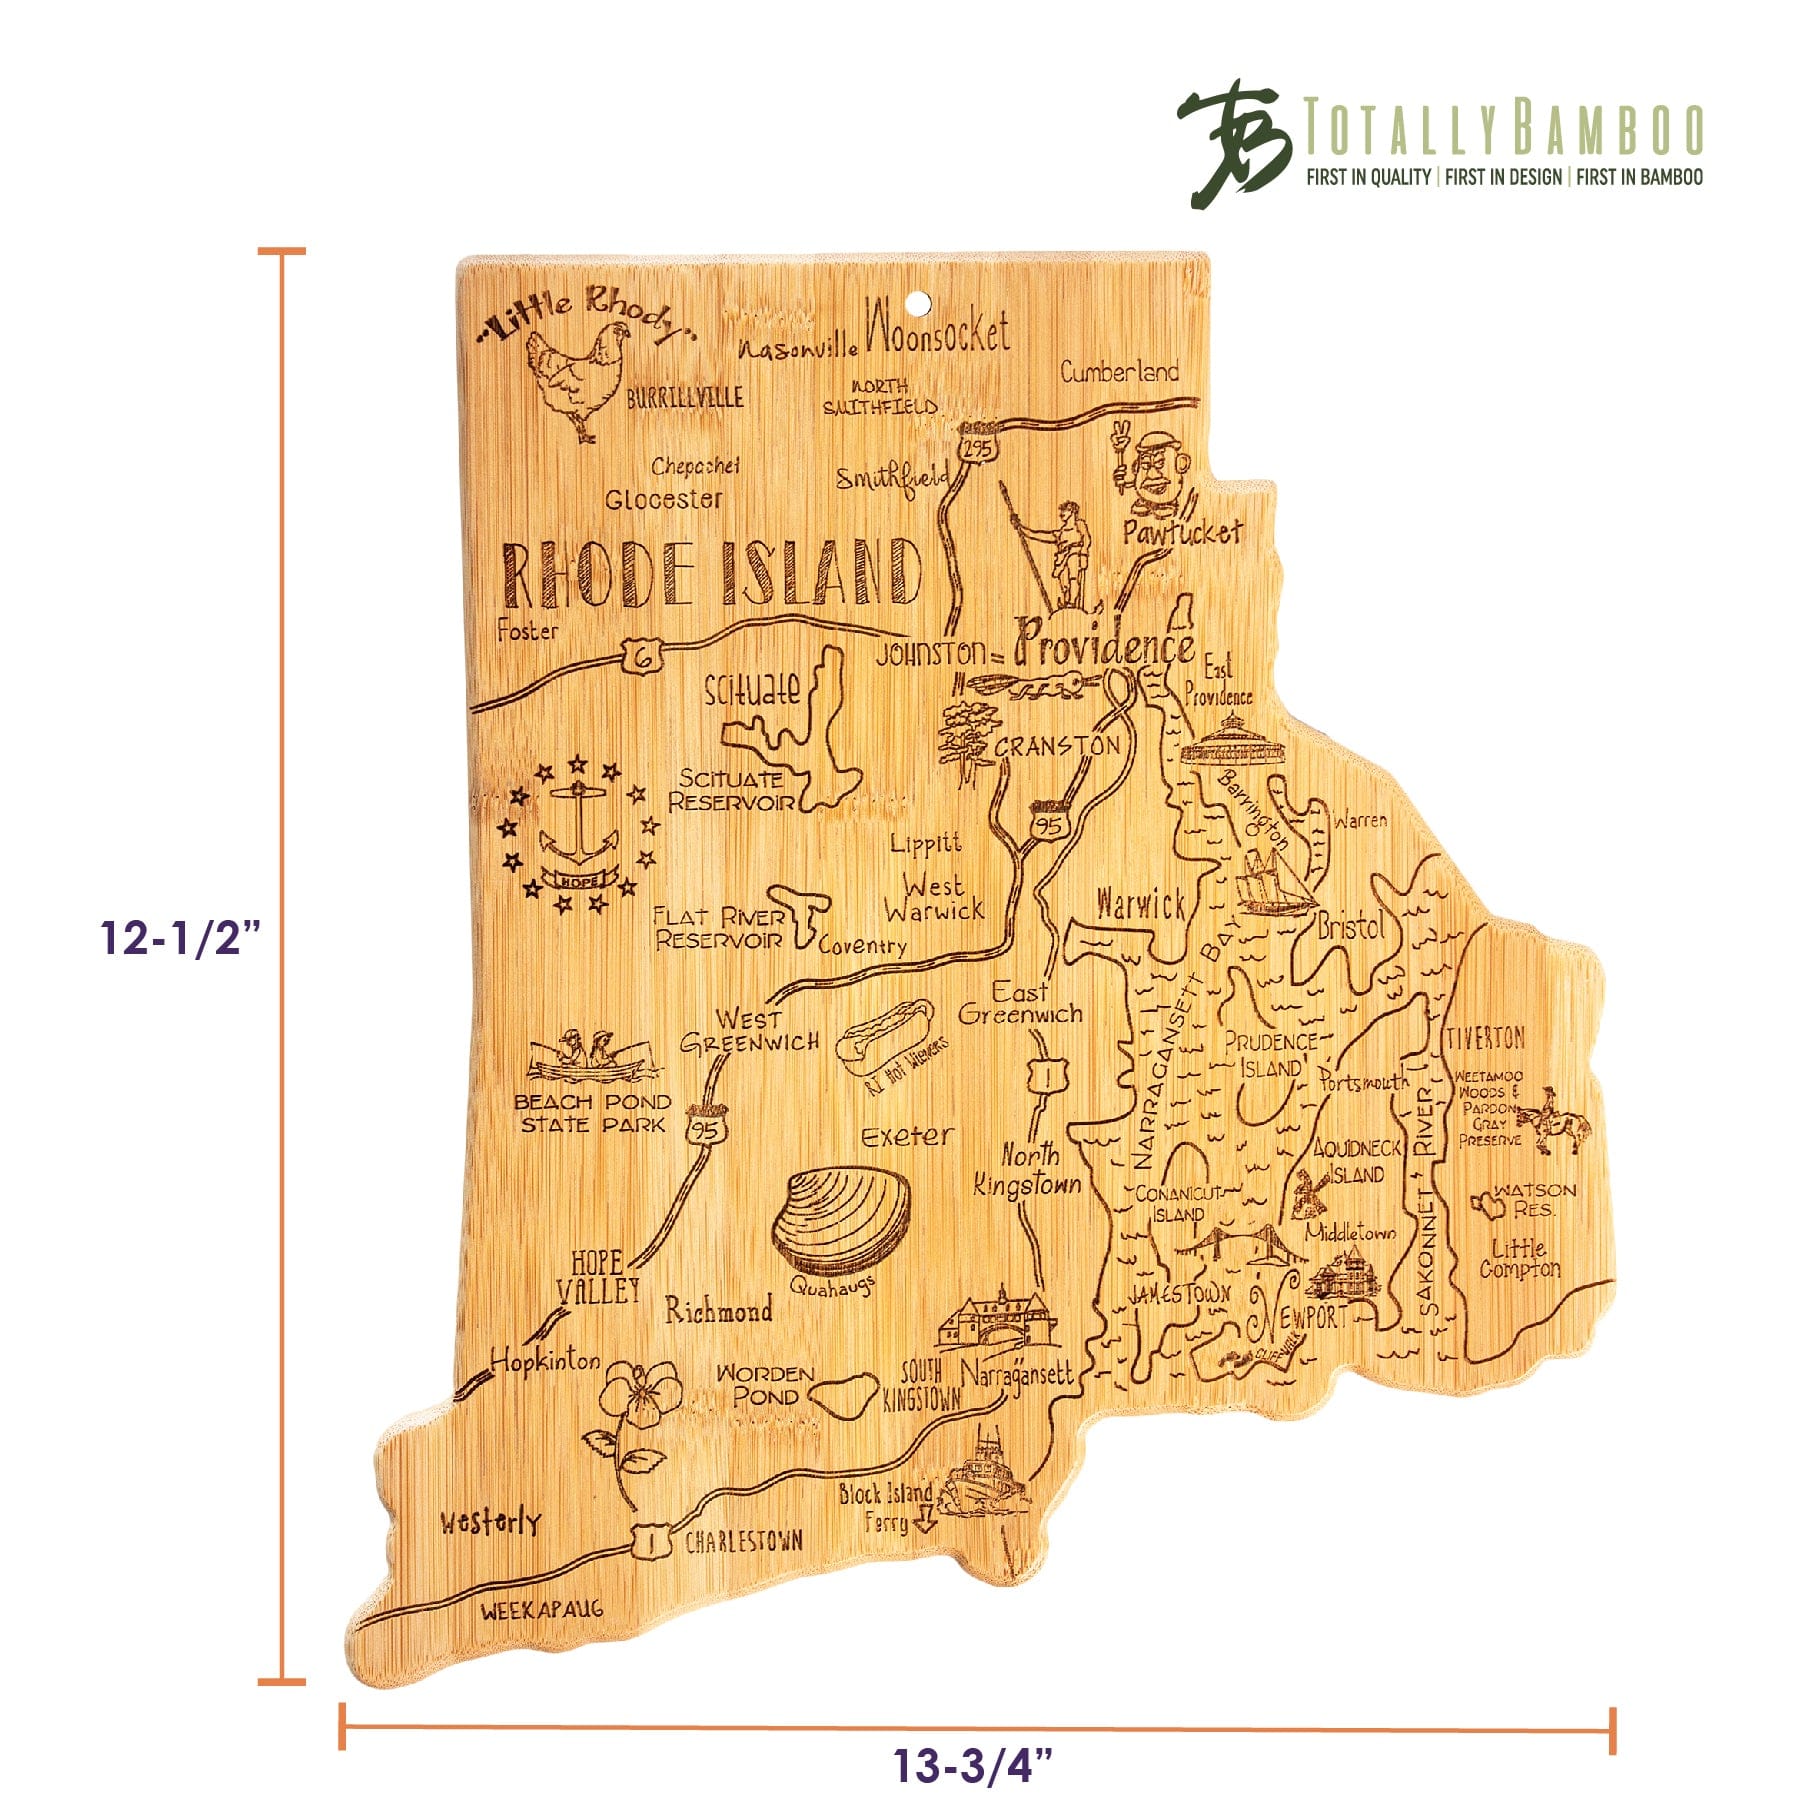 Totally Bamboo Destination Rhode Island State Shaped Bamboo Serving and Cutting Board